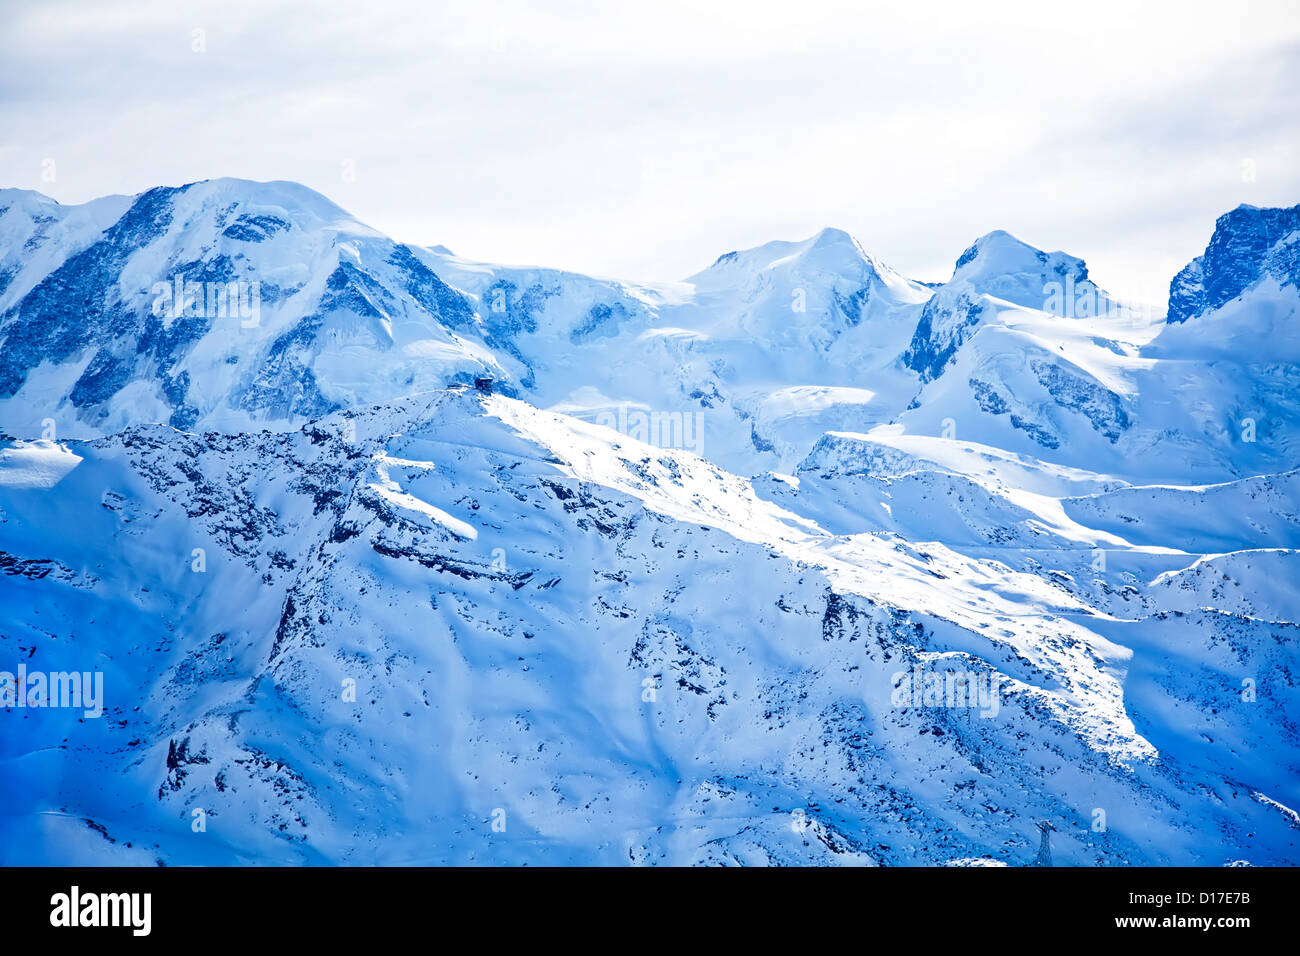 Swiss alps landscape with blue snow Stock Photo